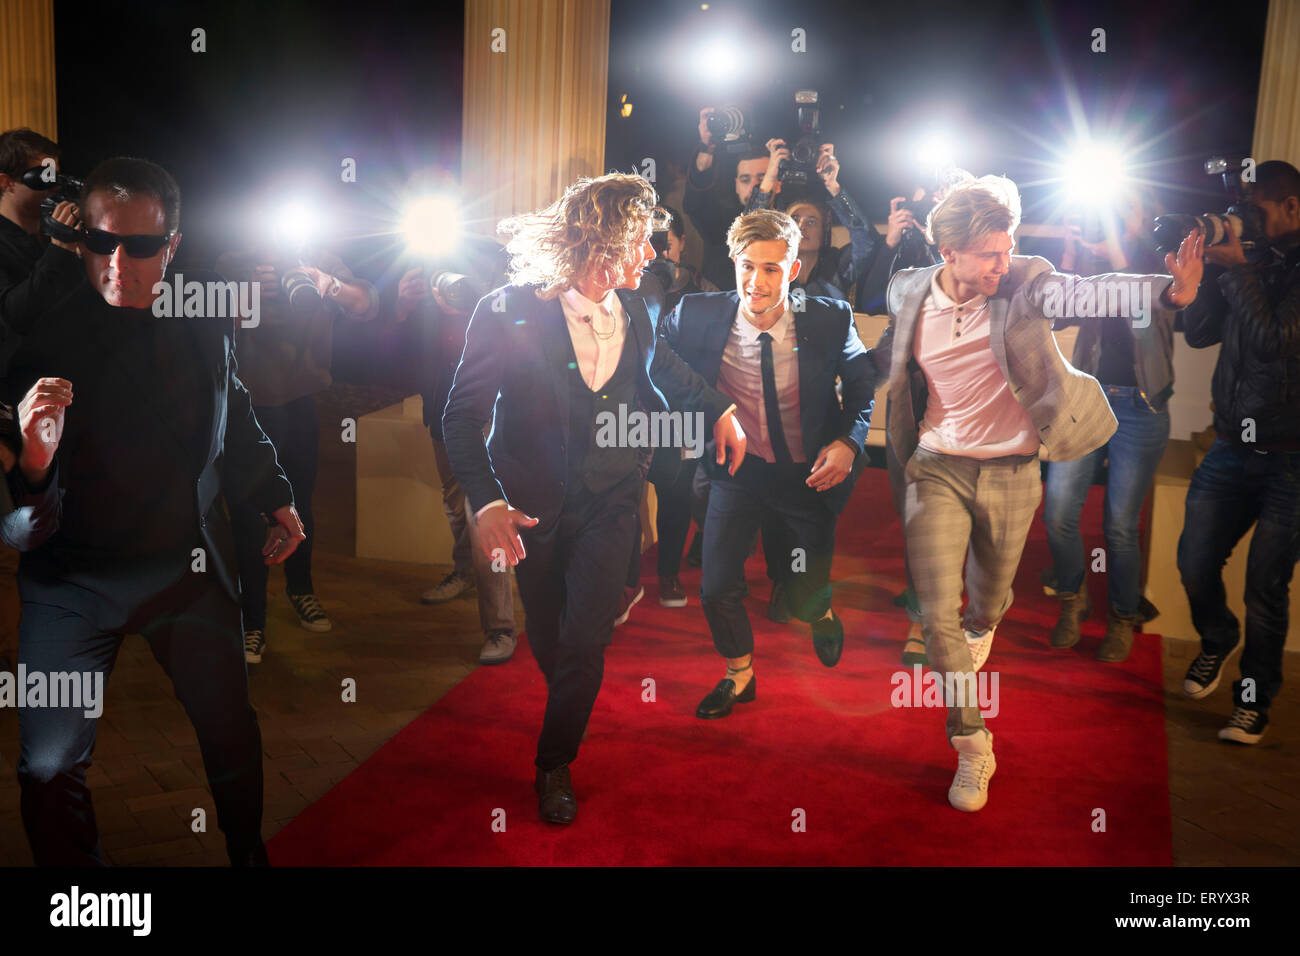 Enthusiastic celebrities arriving and running from paparazzi at red carpet event Stock Photo